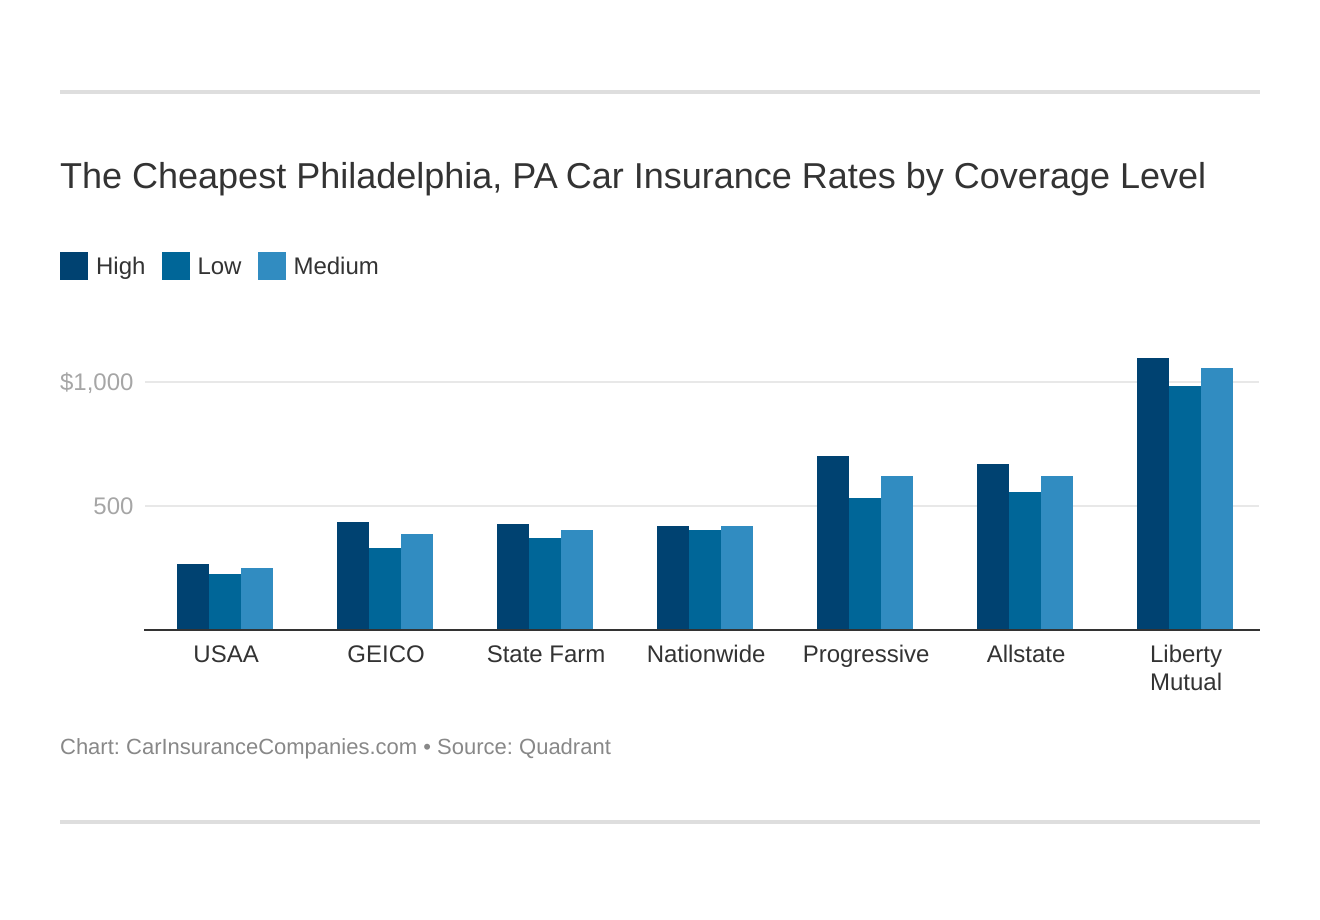 The Cheapest Philadelphia, PA Car Insurance Rates by Coverage Level